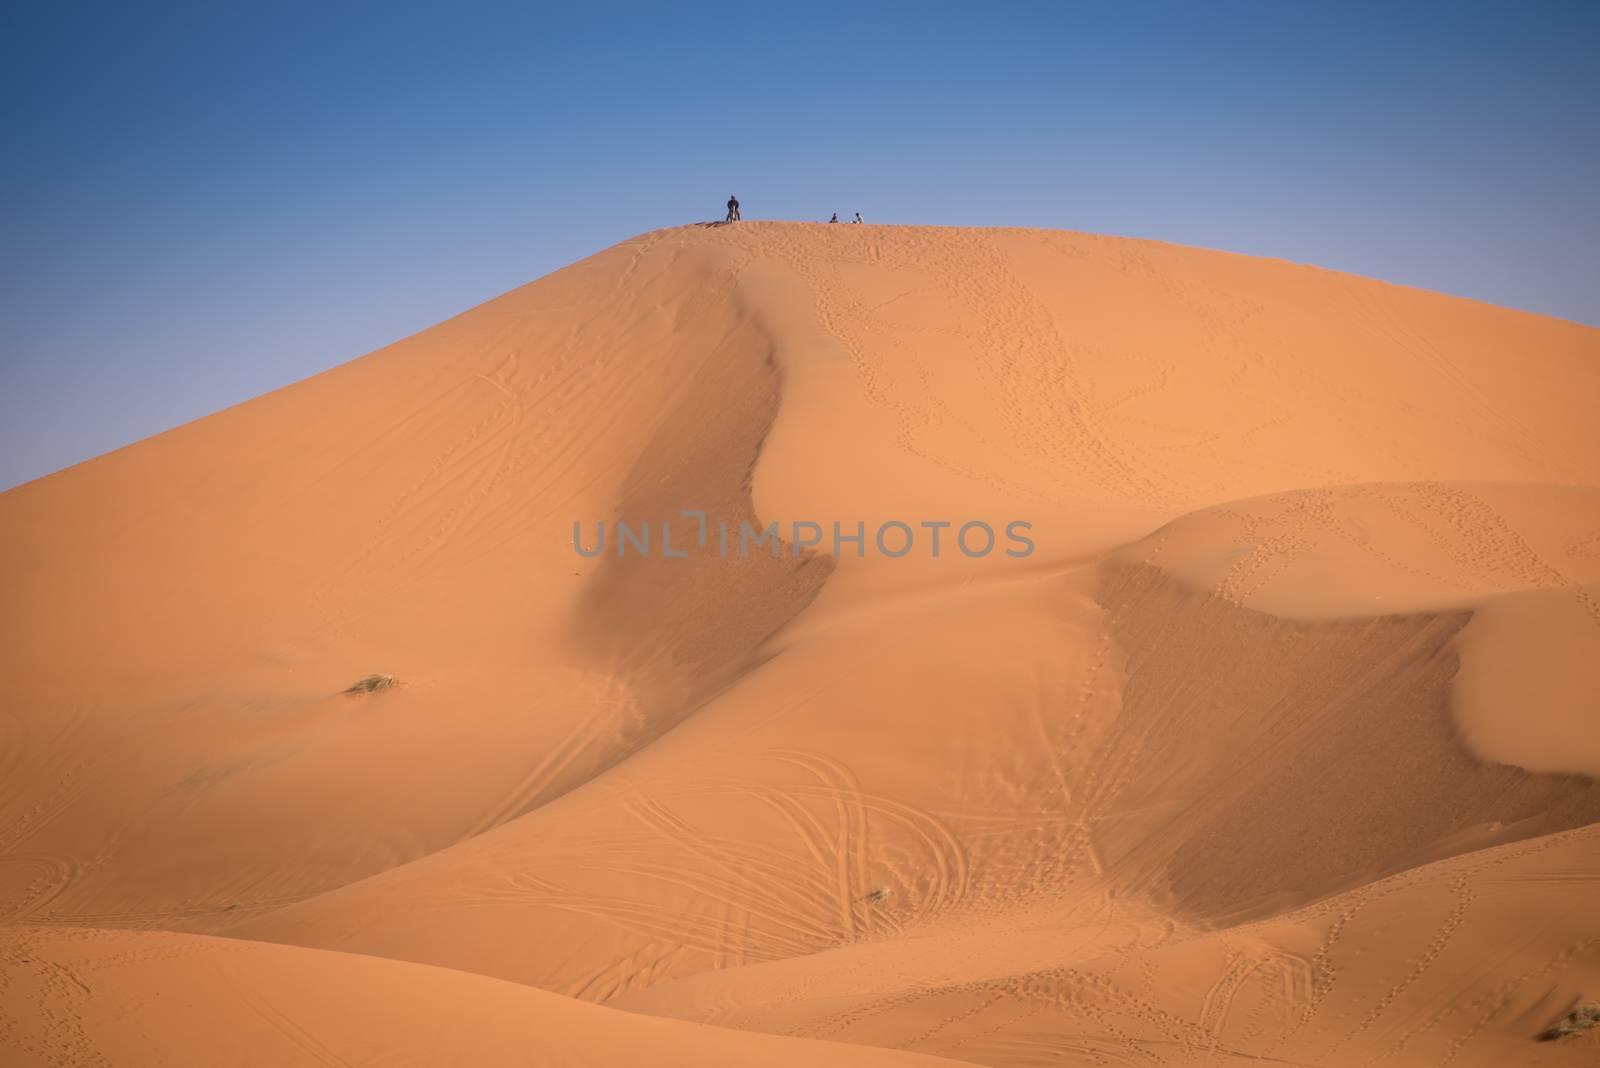 Motorbike rider on the top of the dune, Merzouga, Morocco